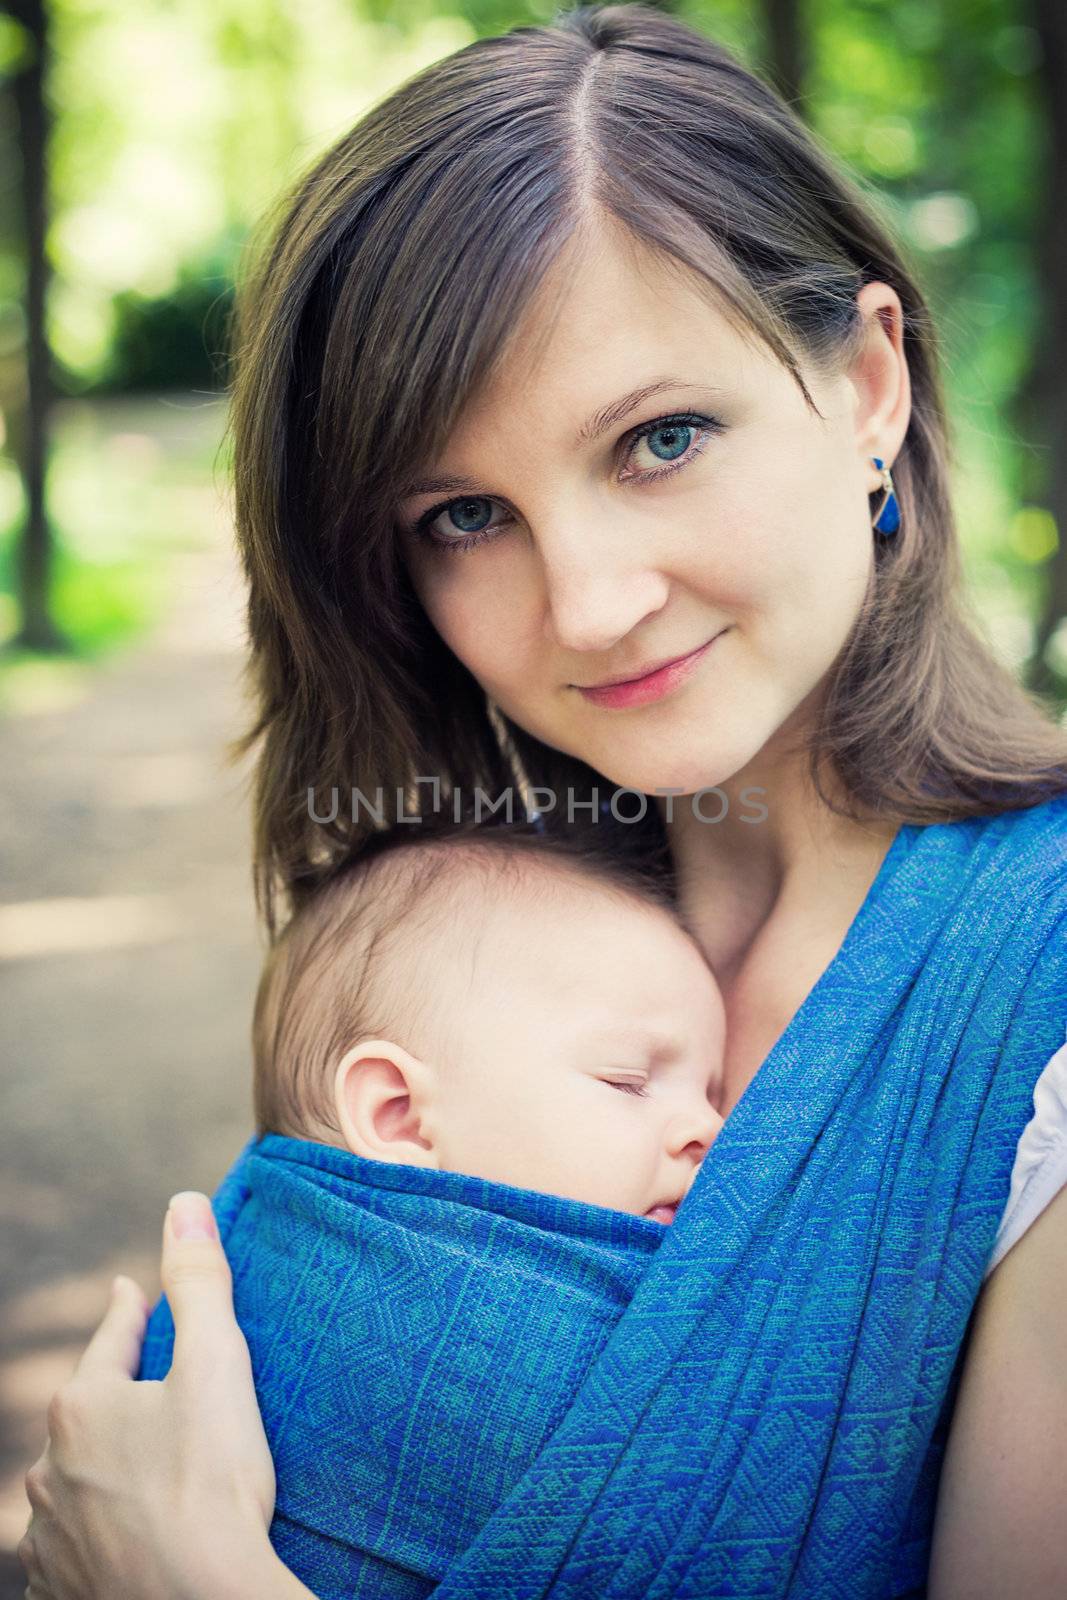 Mother with a newborn baby in a sling